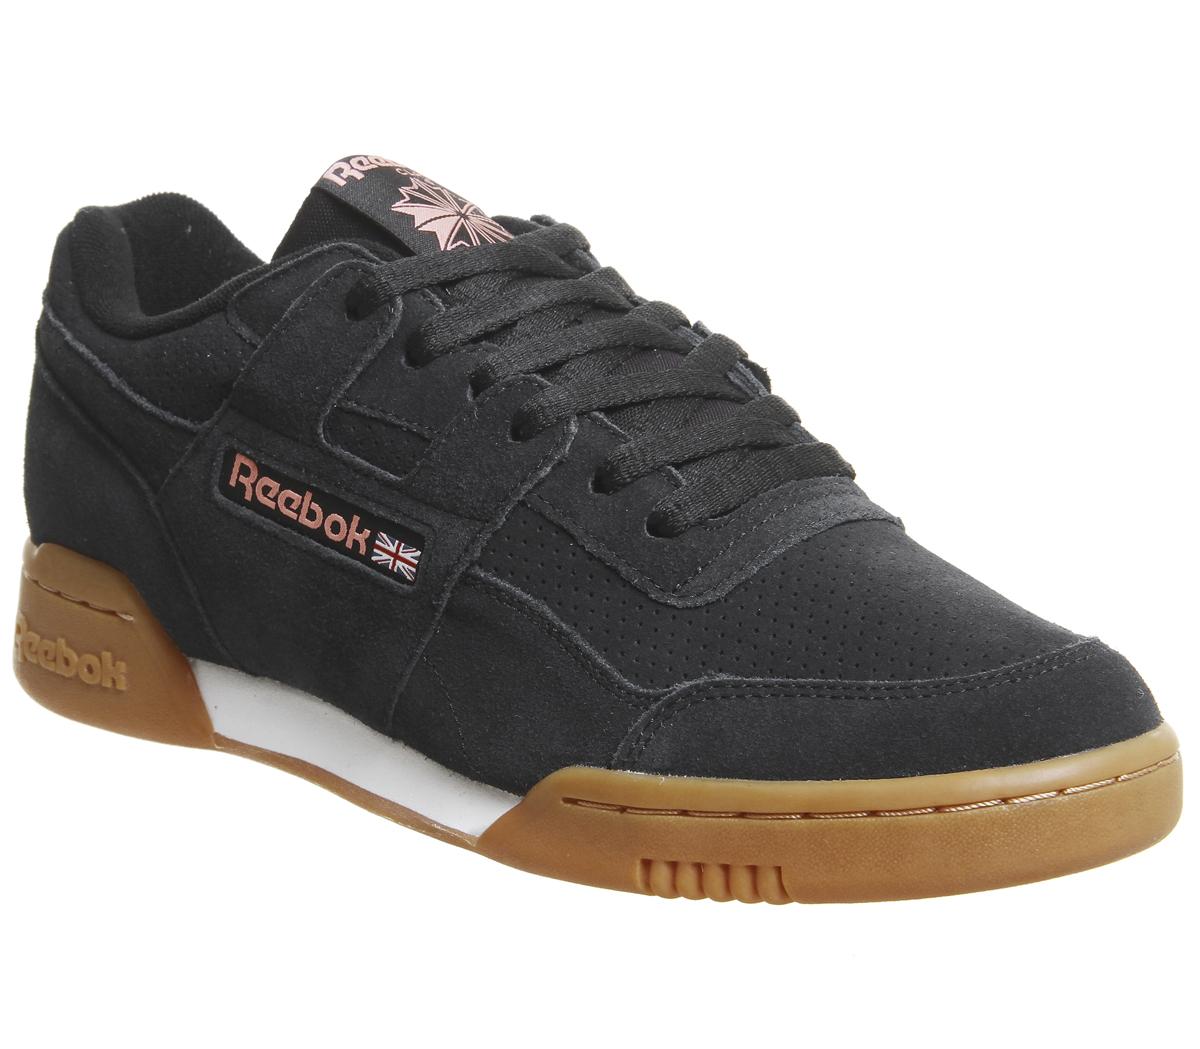 Reebok Workout Plus Trainers Black Digital Pink White Gum His Trainers